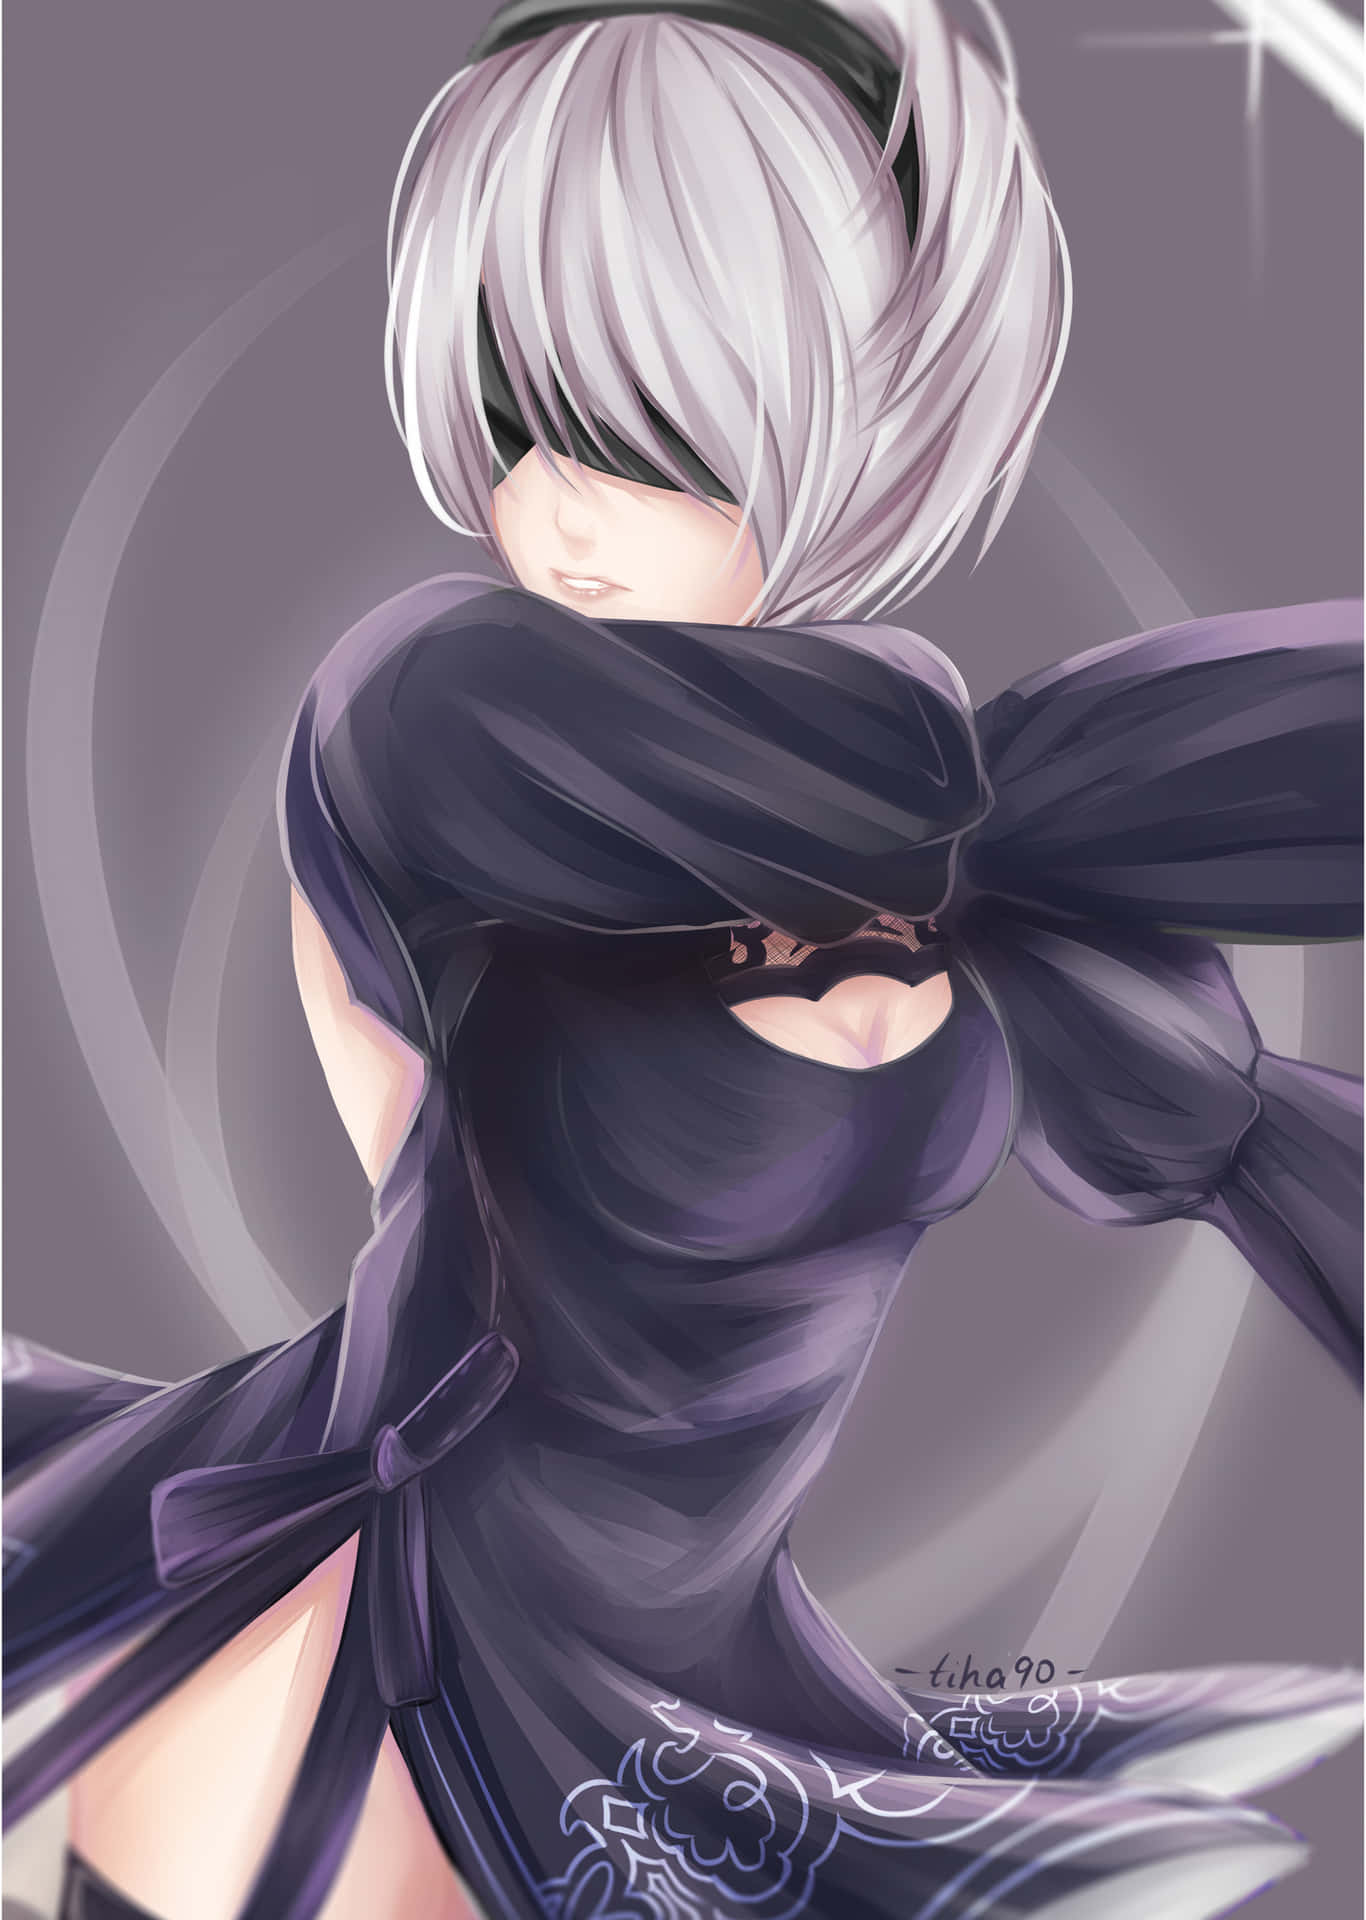 2B - Ready to start the journey